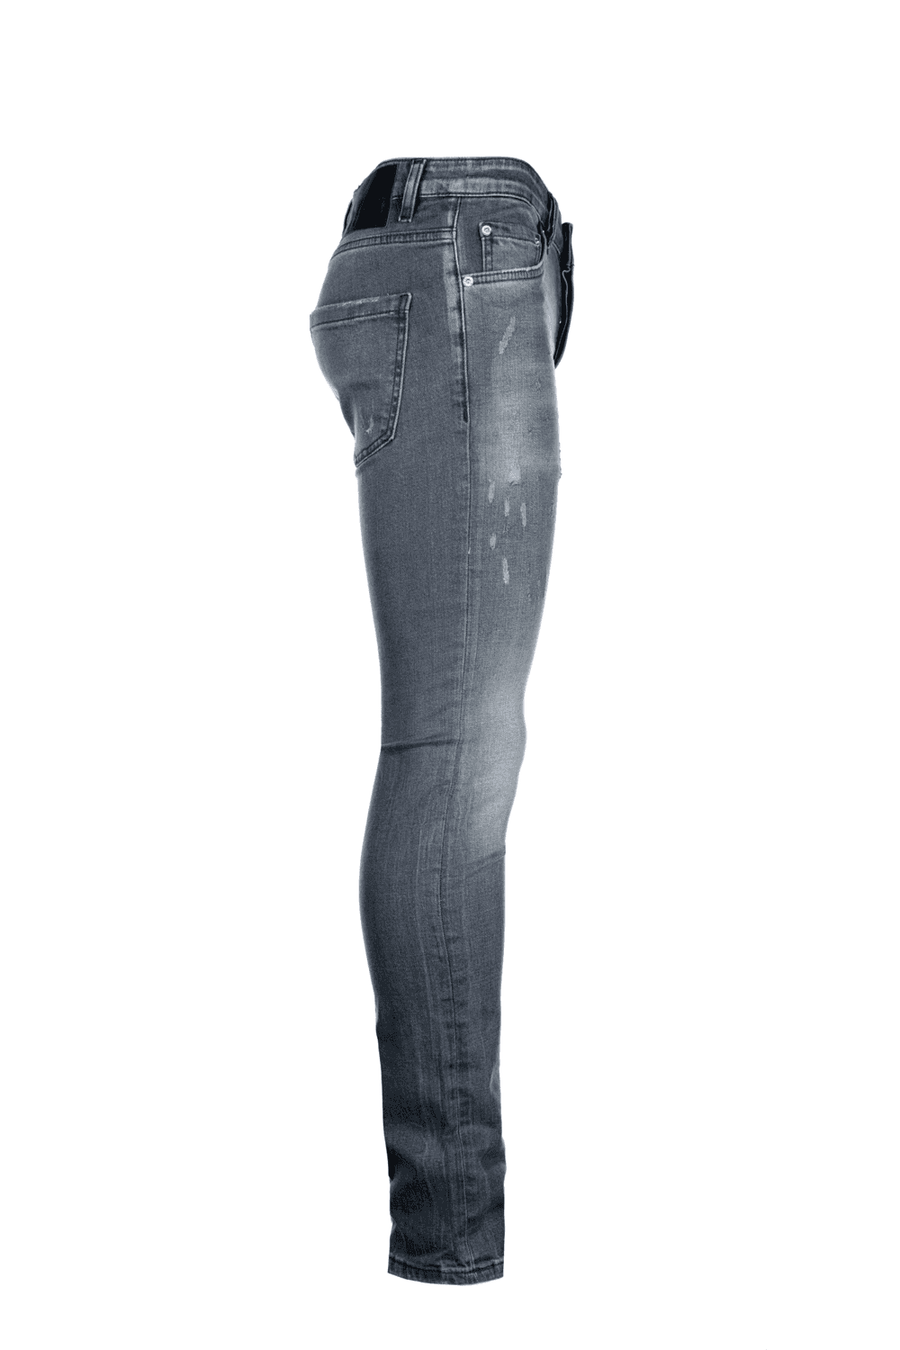 Buy the 7TH HVN Cortland Jean in Blue at Intro. Spend £50 for free UK delivery. Official stockists. We ship worldwide.